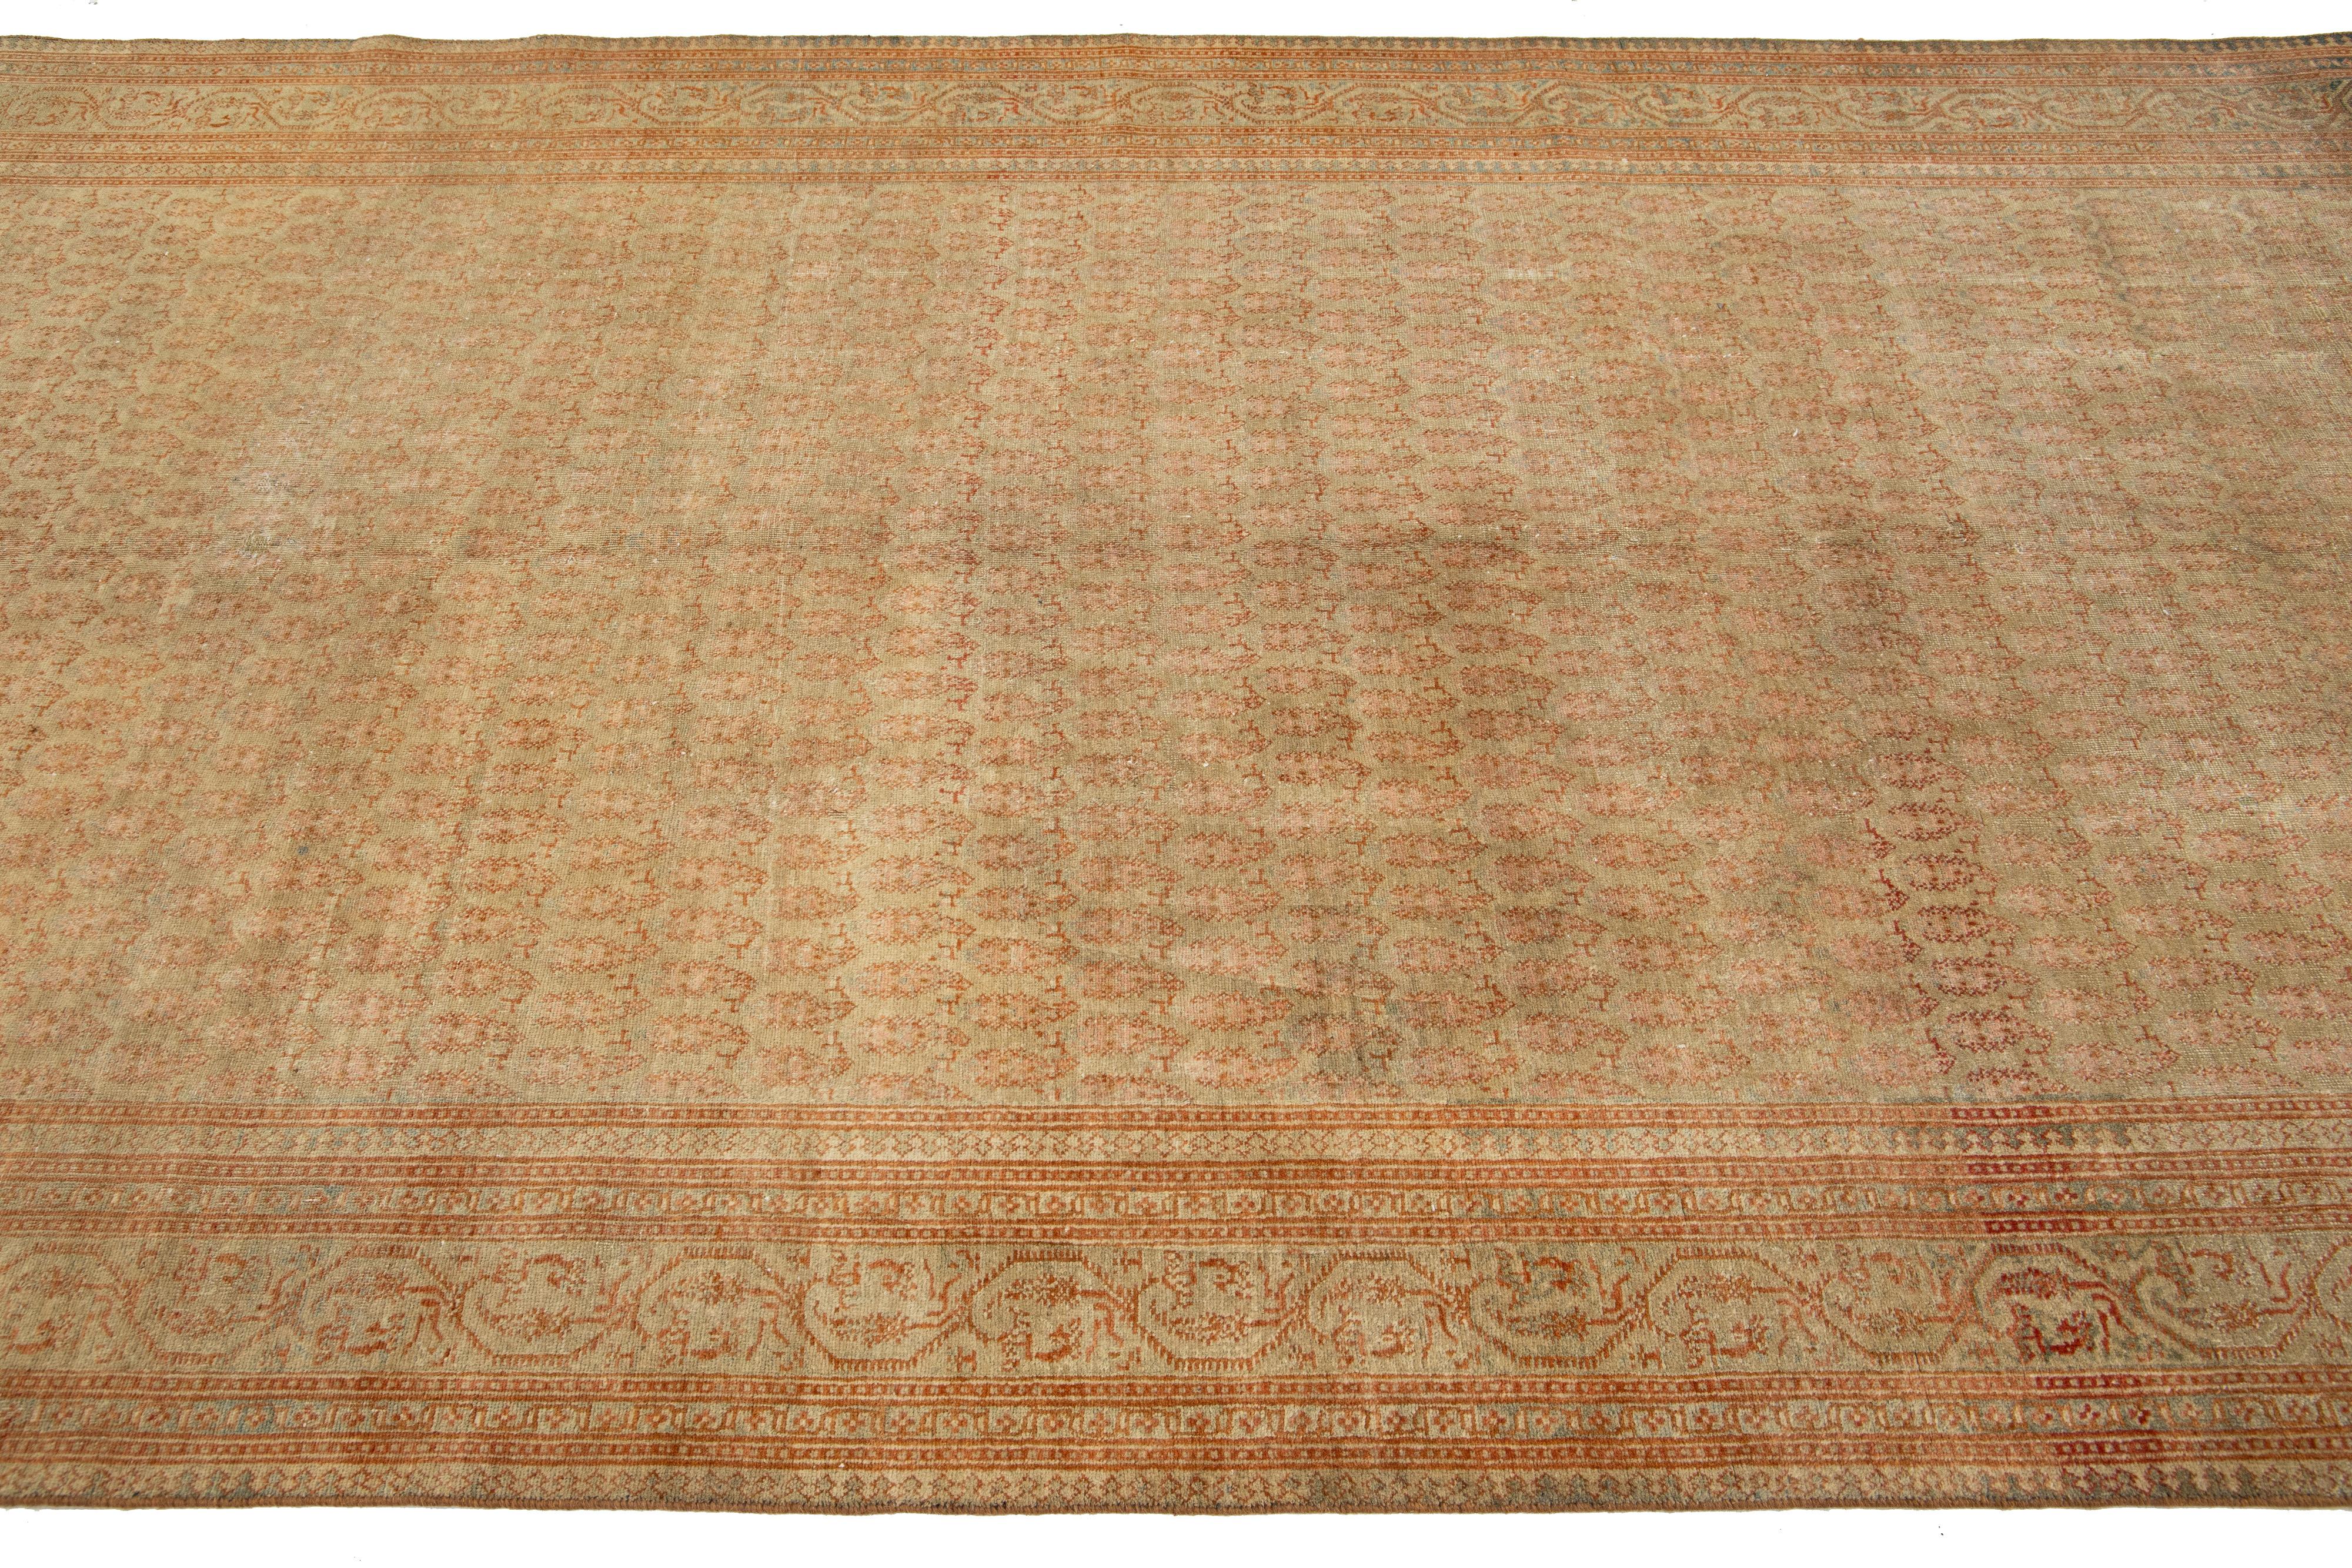 1920s Antique Sivas Gallery Wool rug In Beige Tan Color With Allover Pattern In Good Condition For Sale In Norwalk, CT